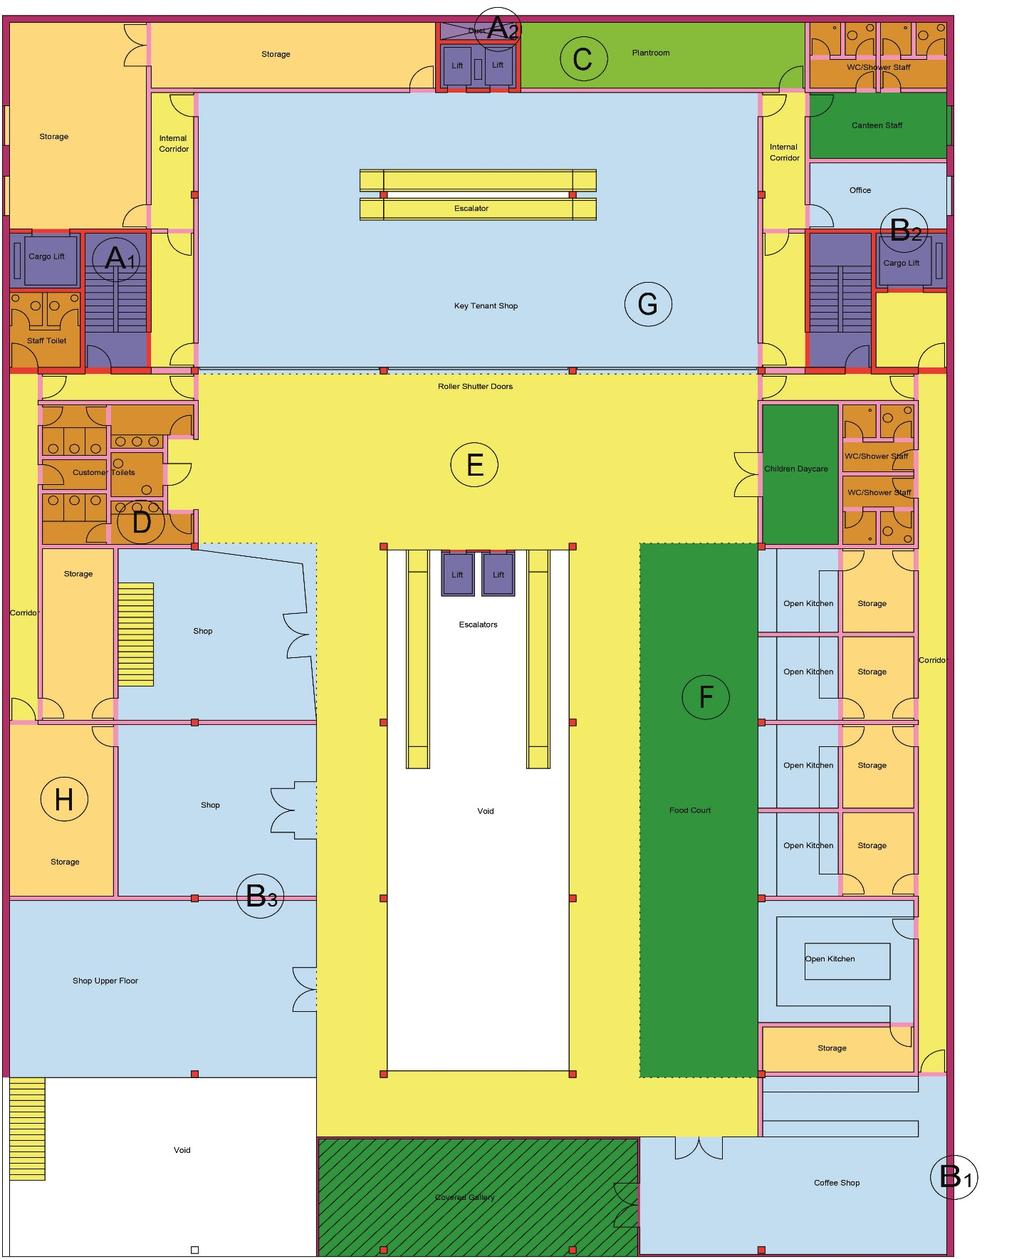 These are technical drawings and do not represent either the tenant or